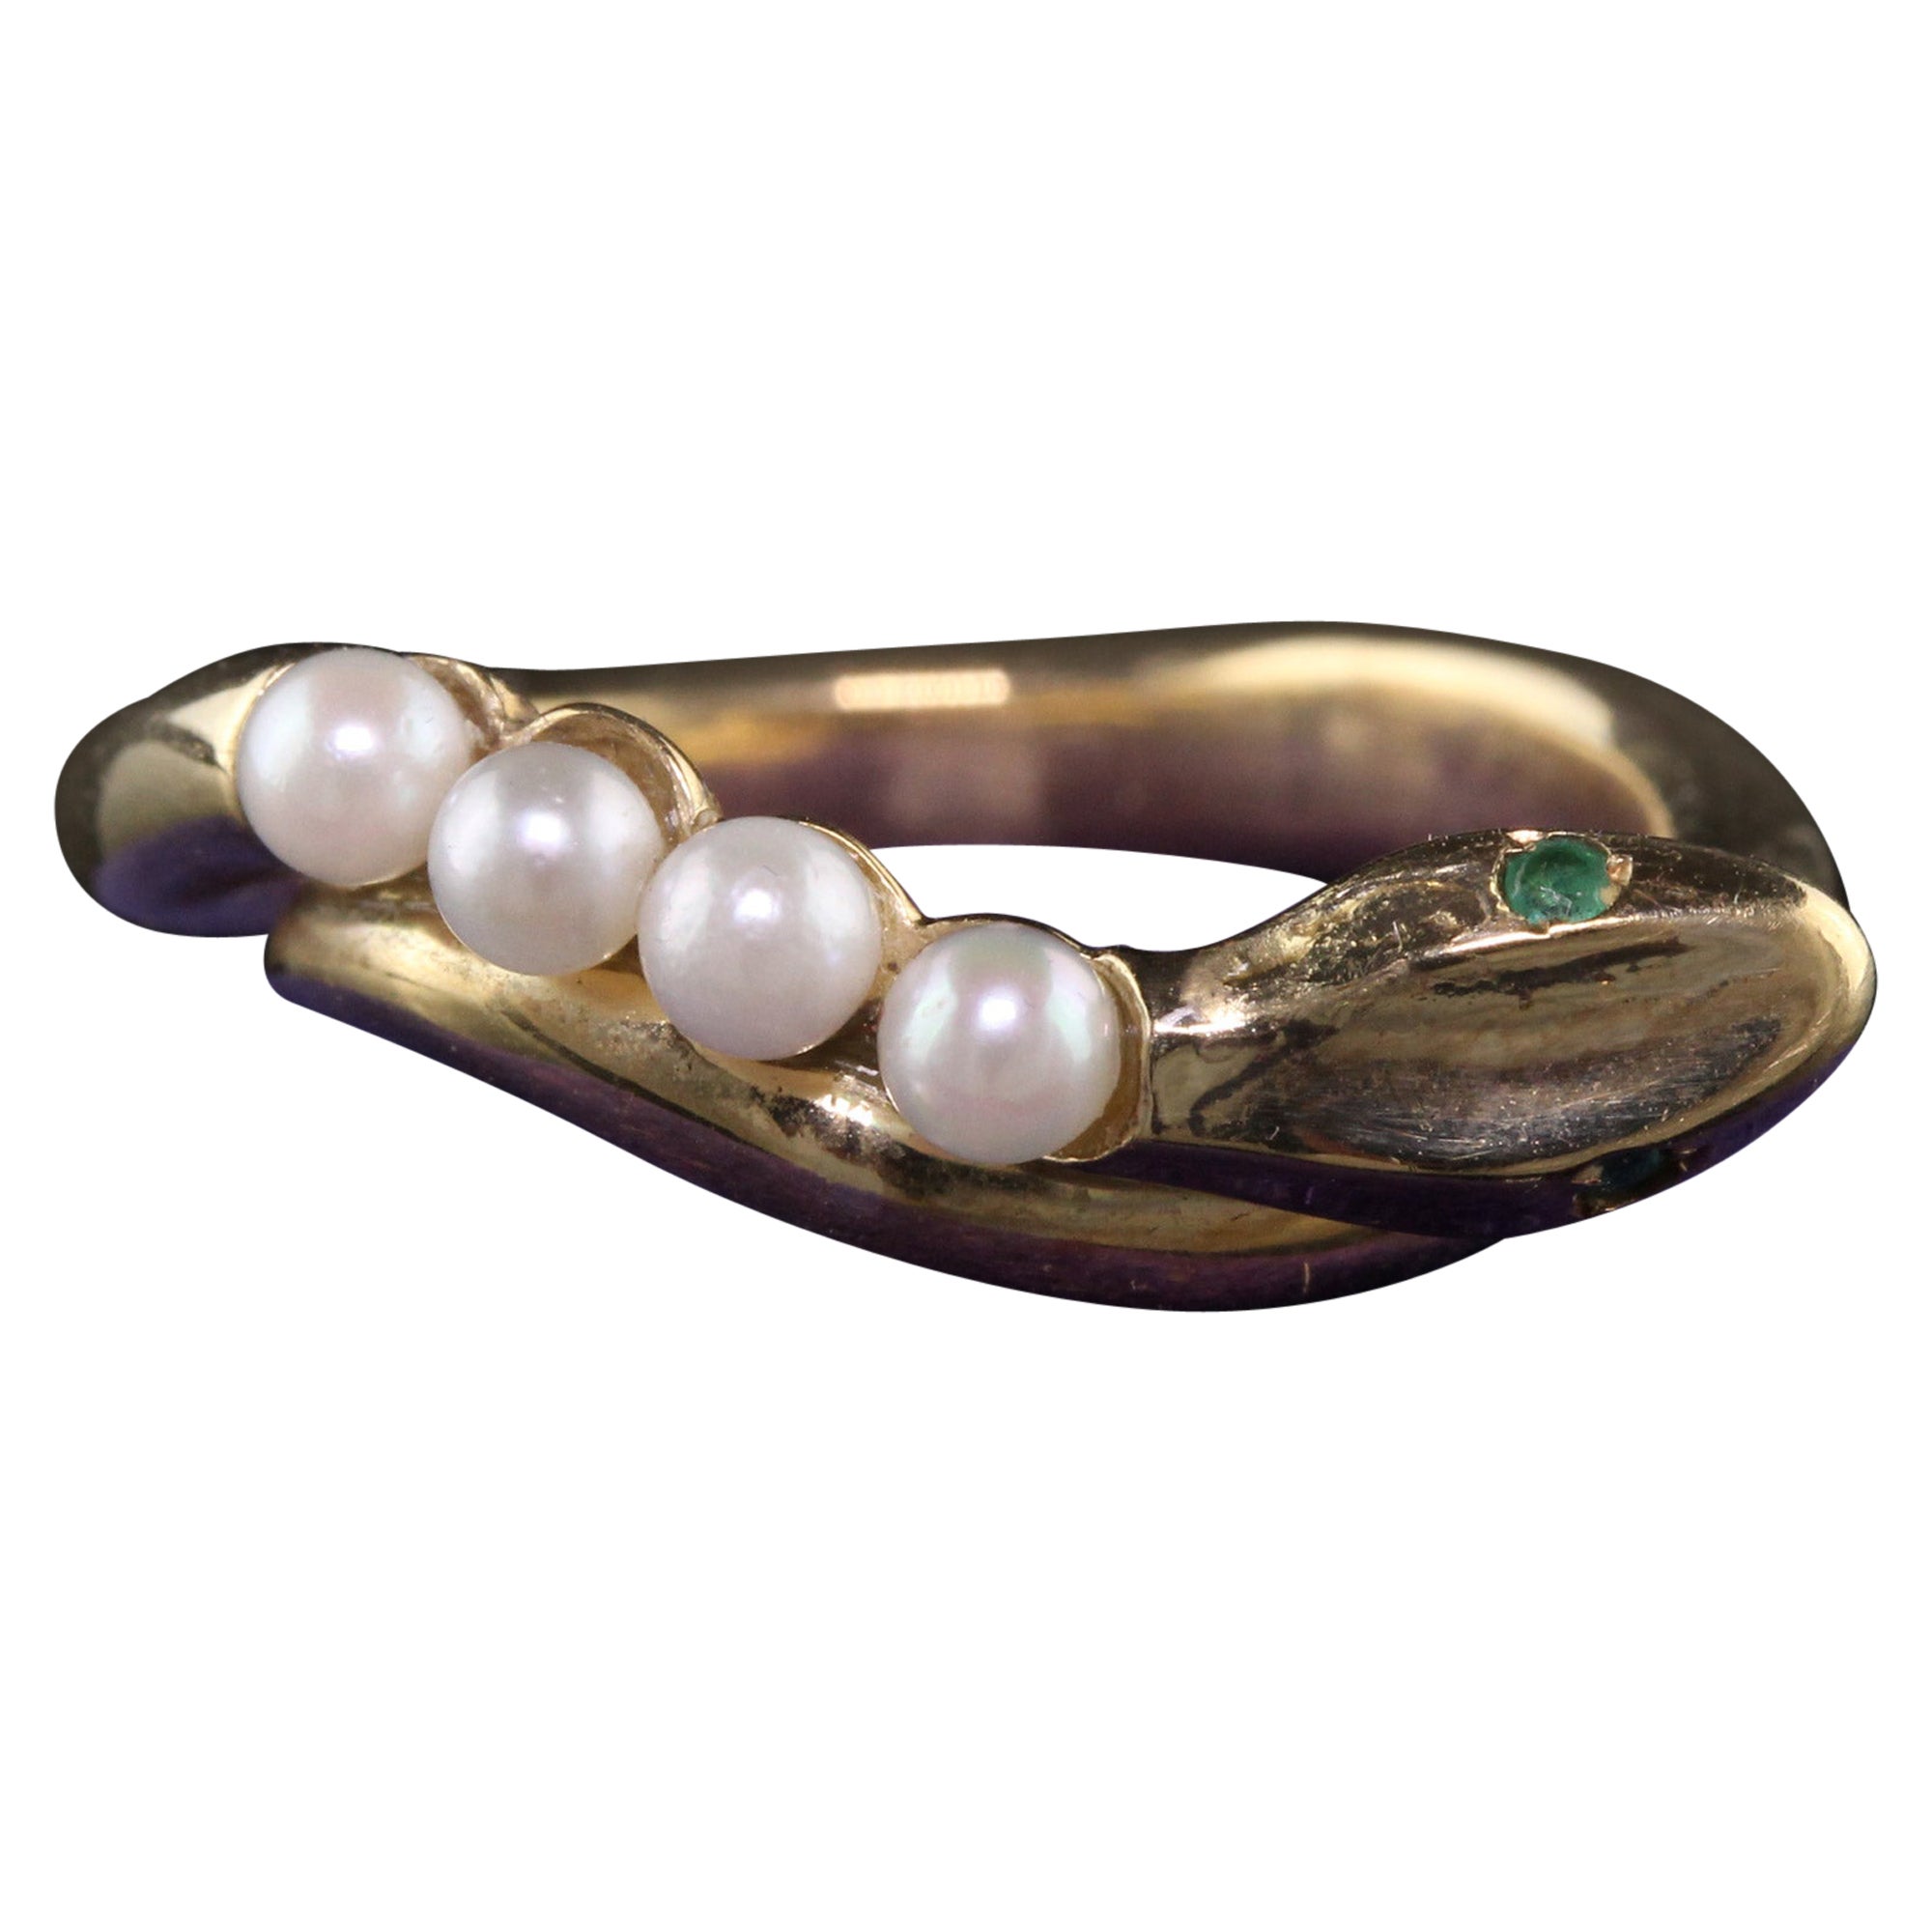 Retro Estate 14K Yellow Gold Pearl and Emerald Snake Ring